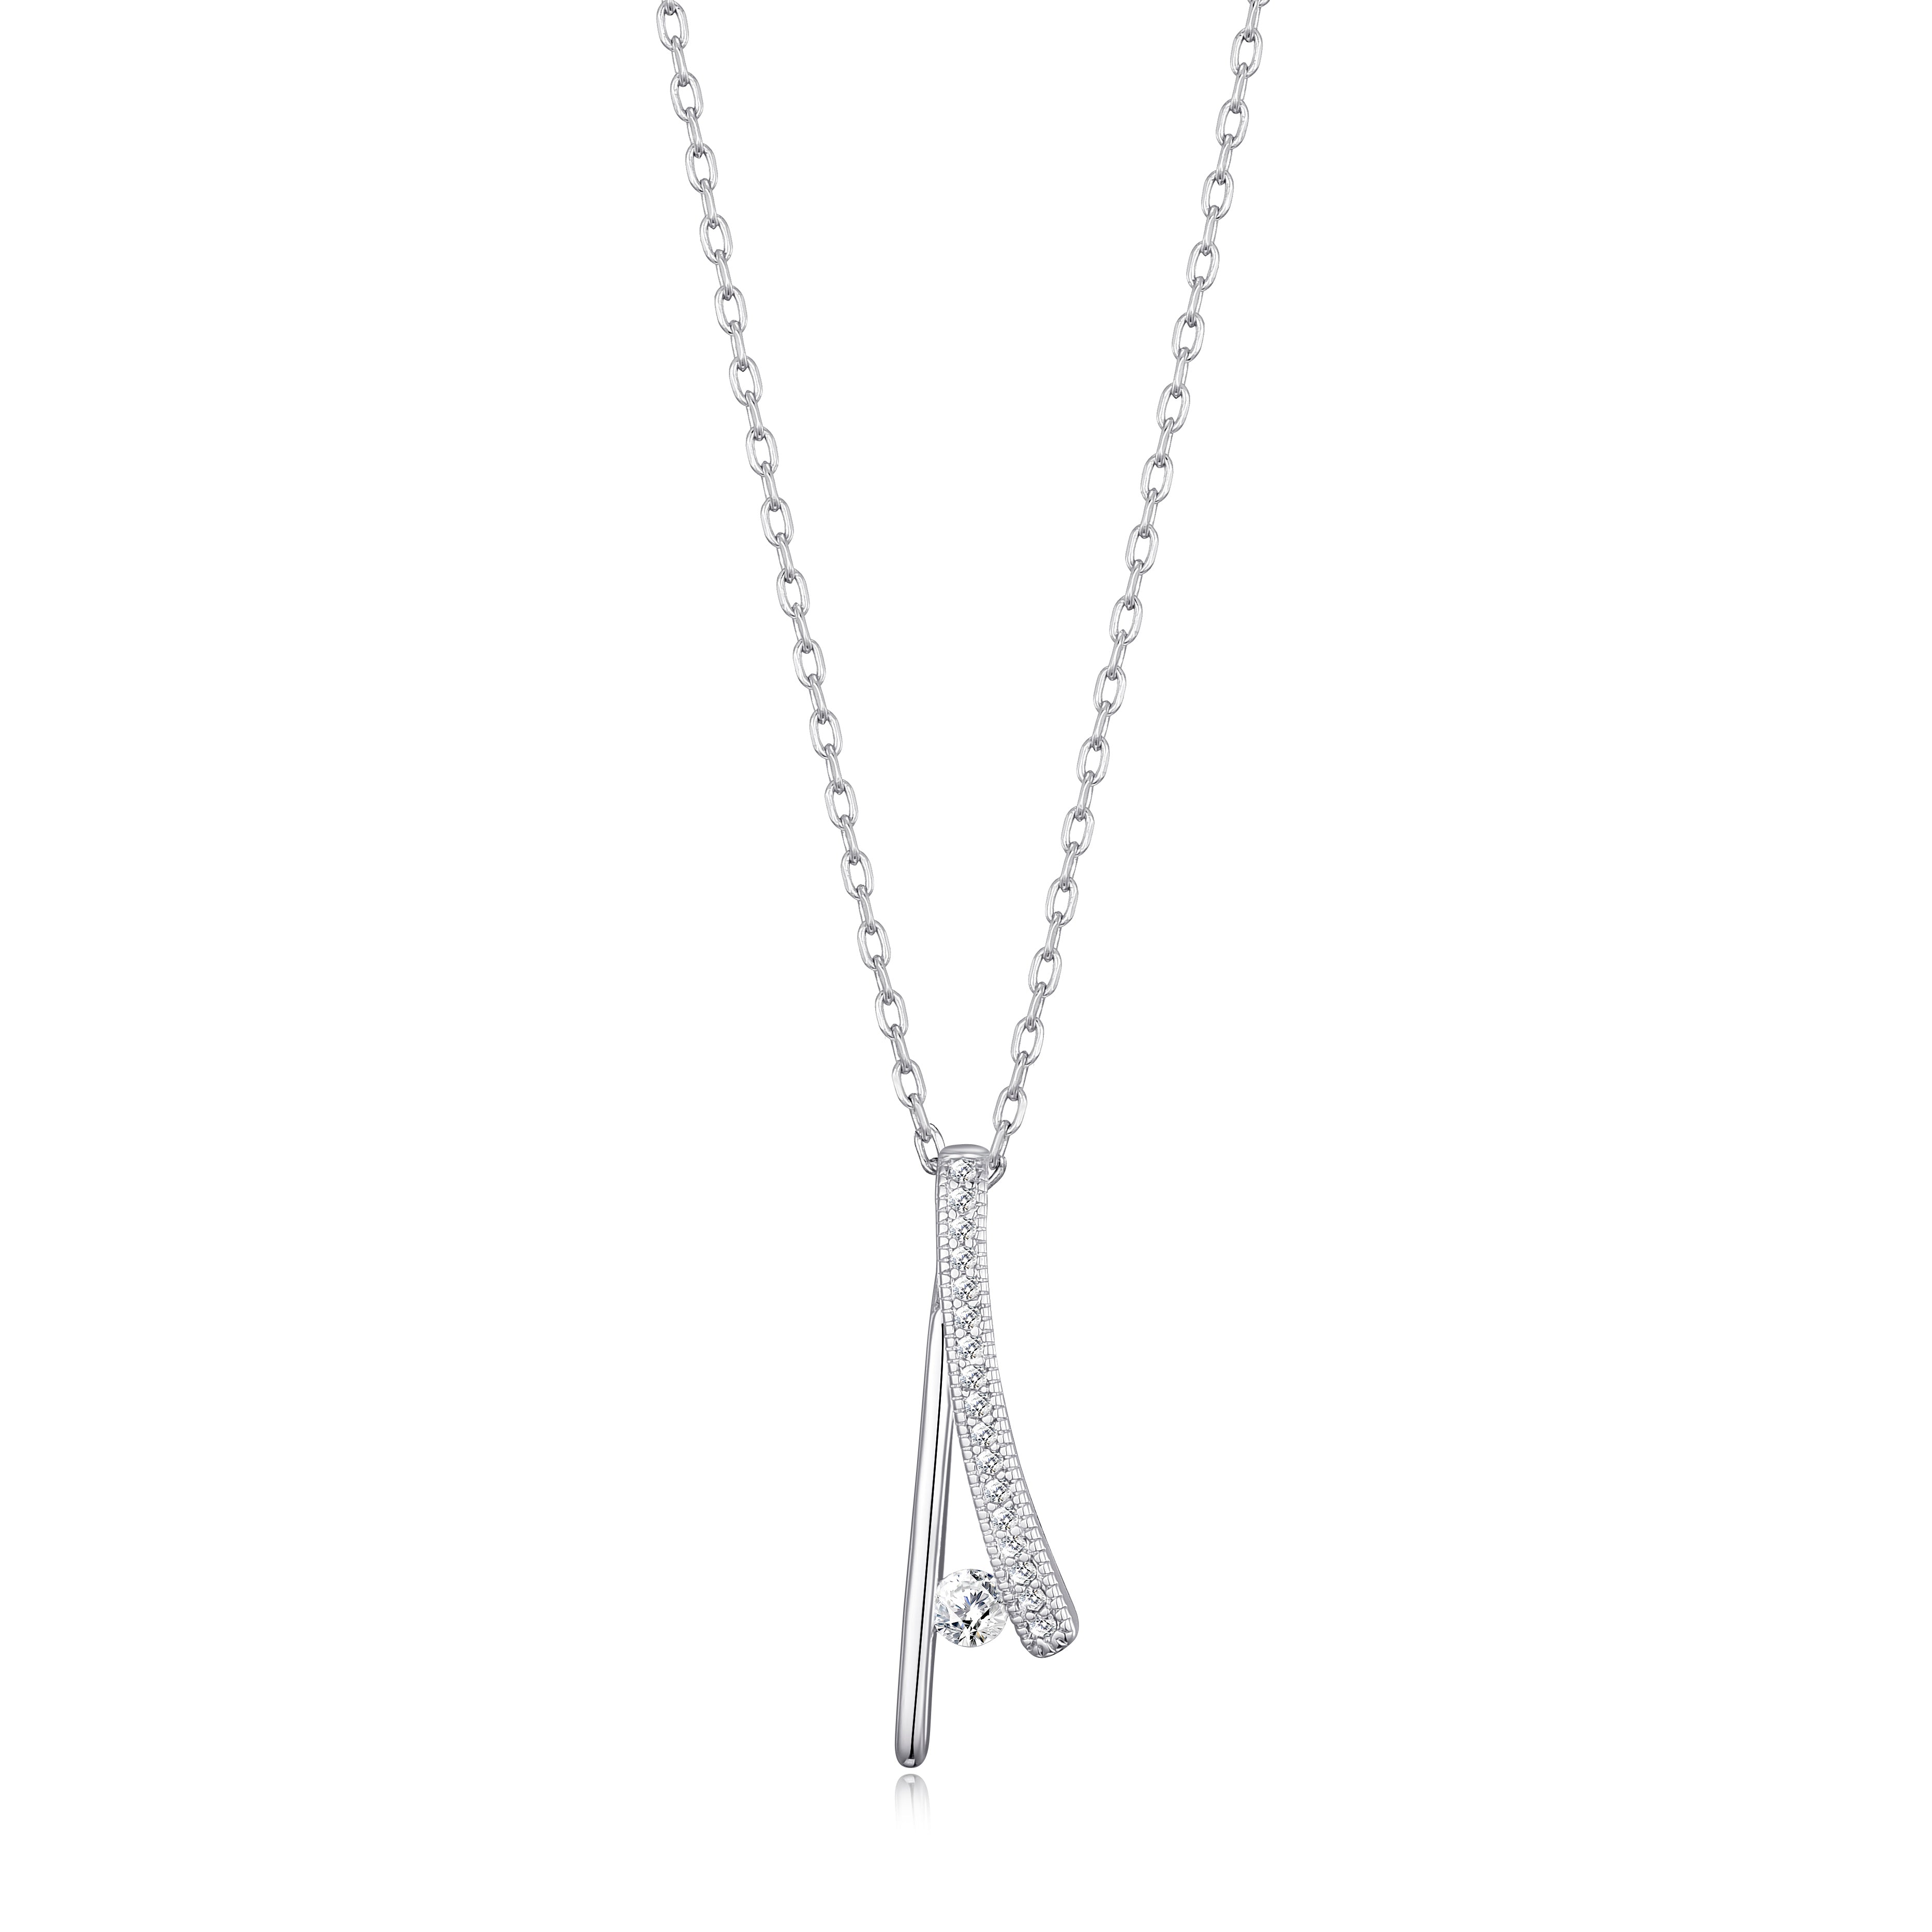 Silver Plated Curved Bar Necklace Created with Zircondia® Crystals by Philip Jones Jewellery